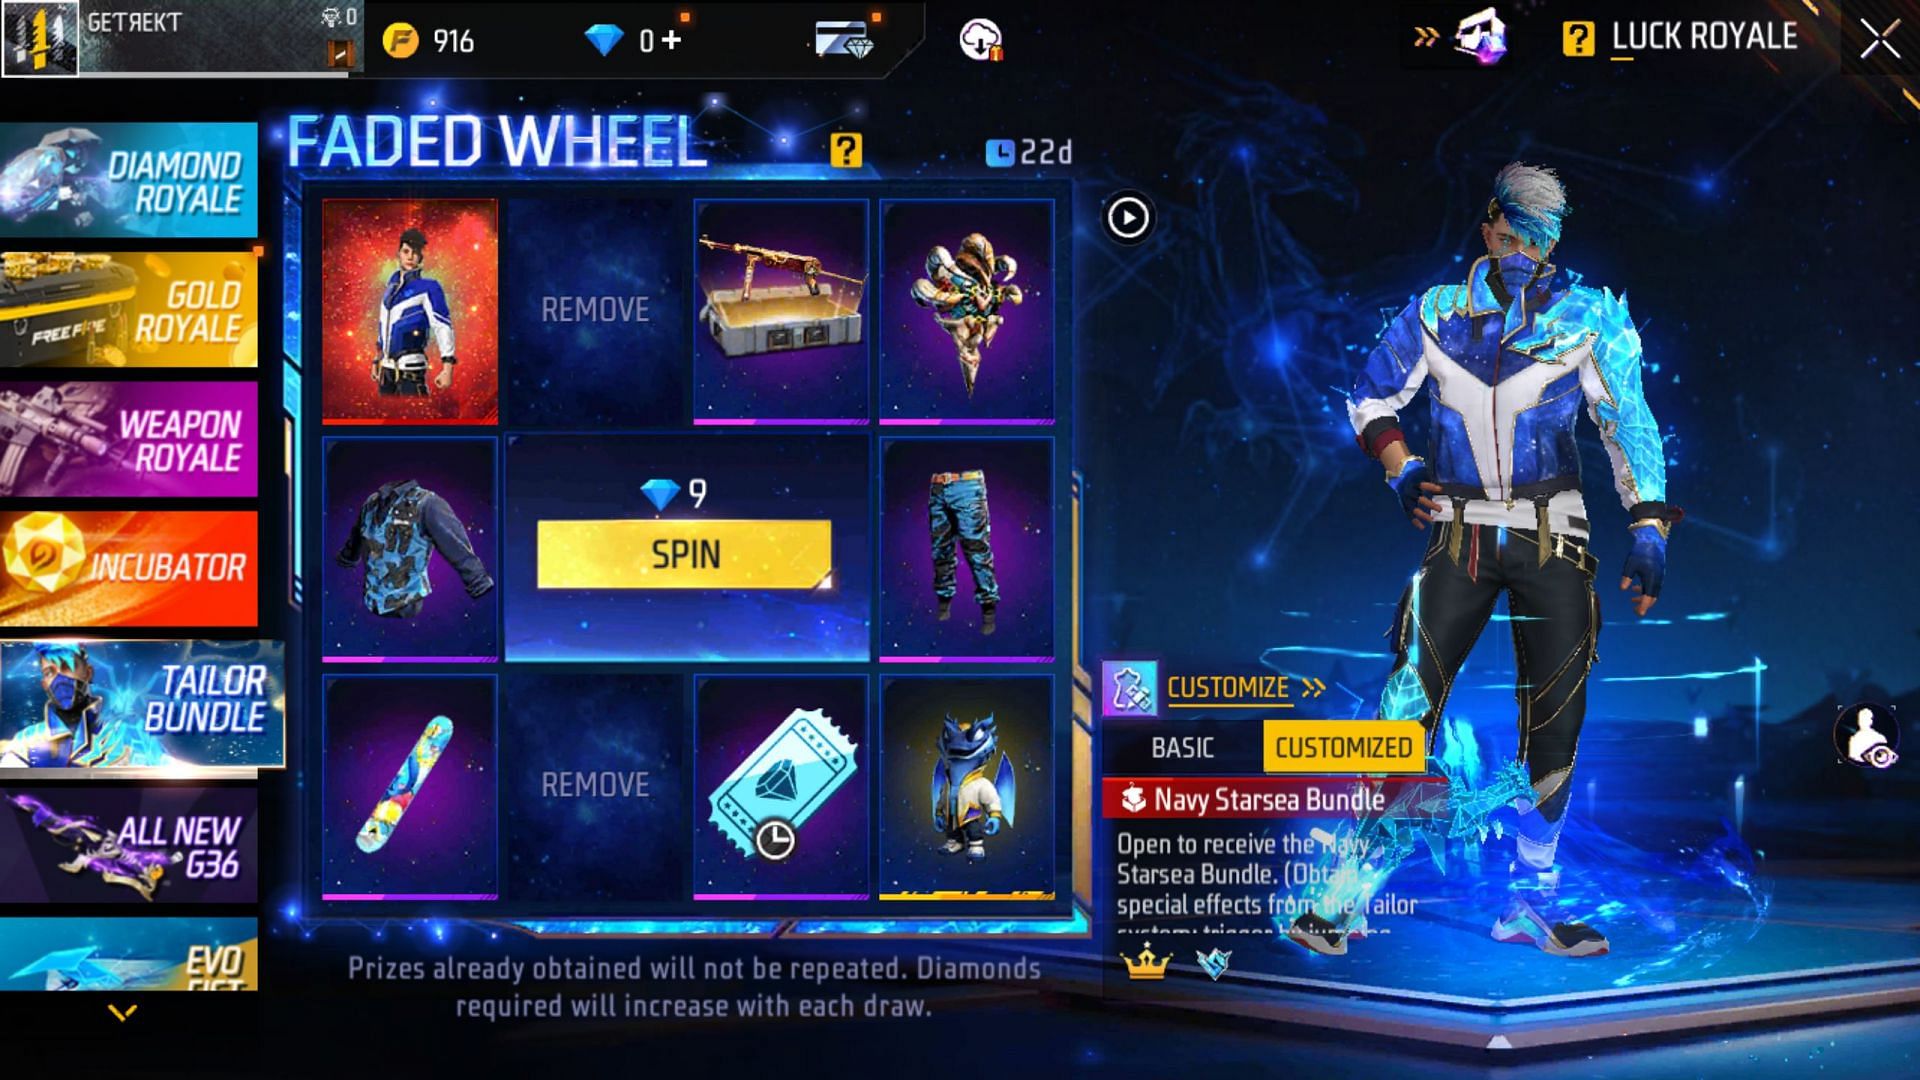 After you have removed the items, you can make the spins by spending diamonds (Image via Garena)